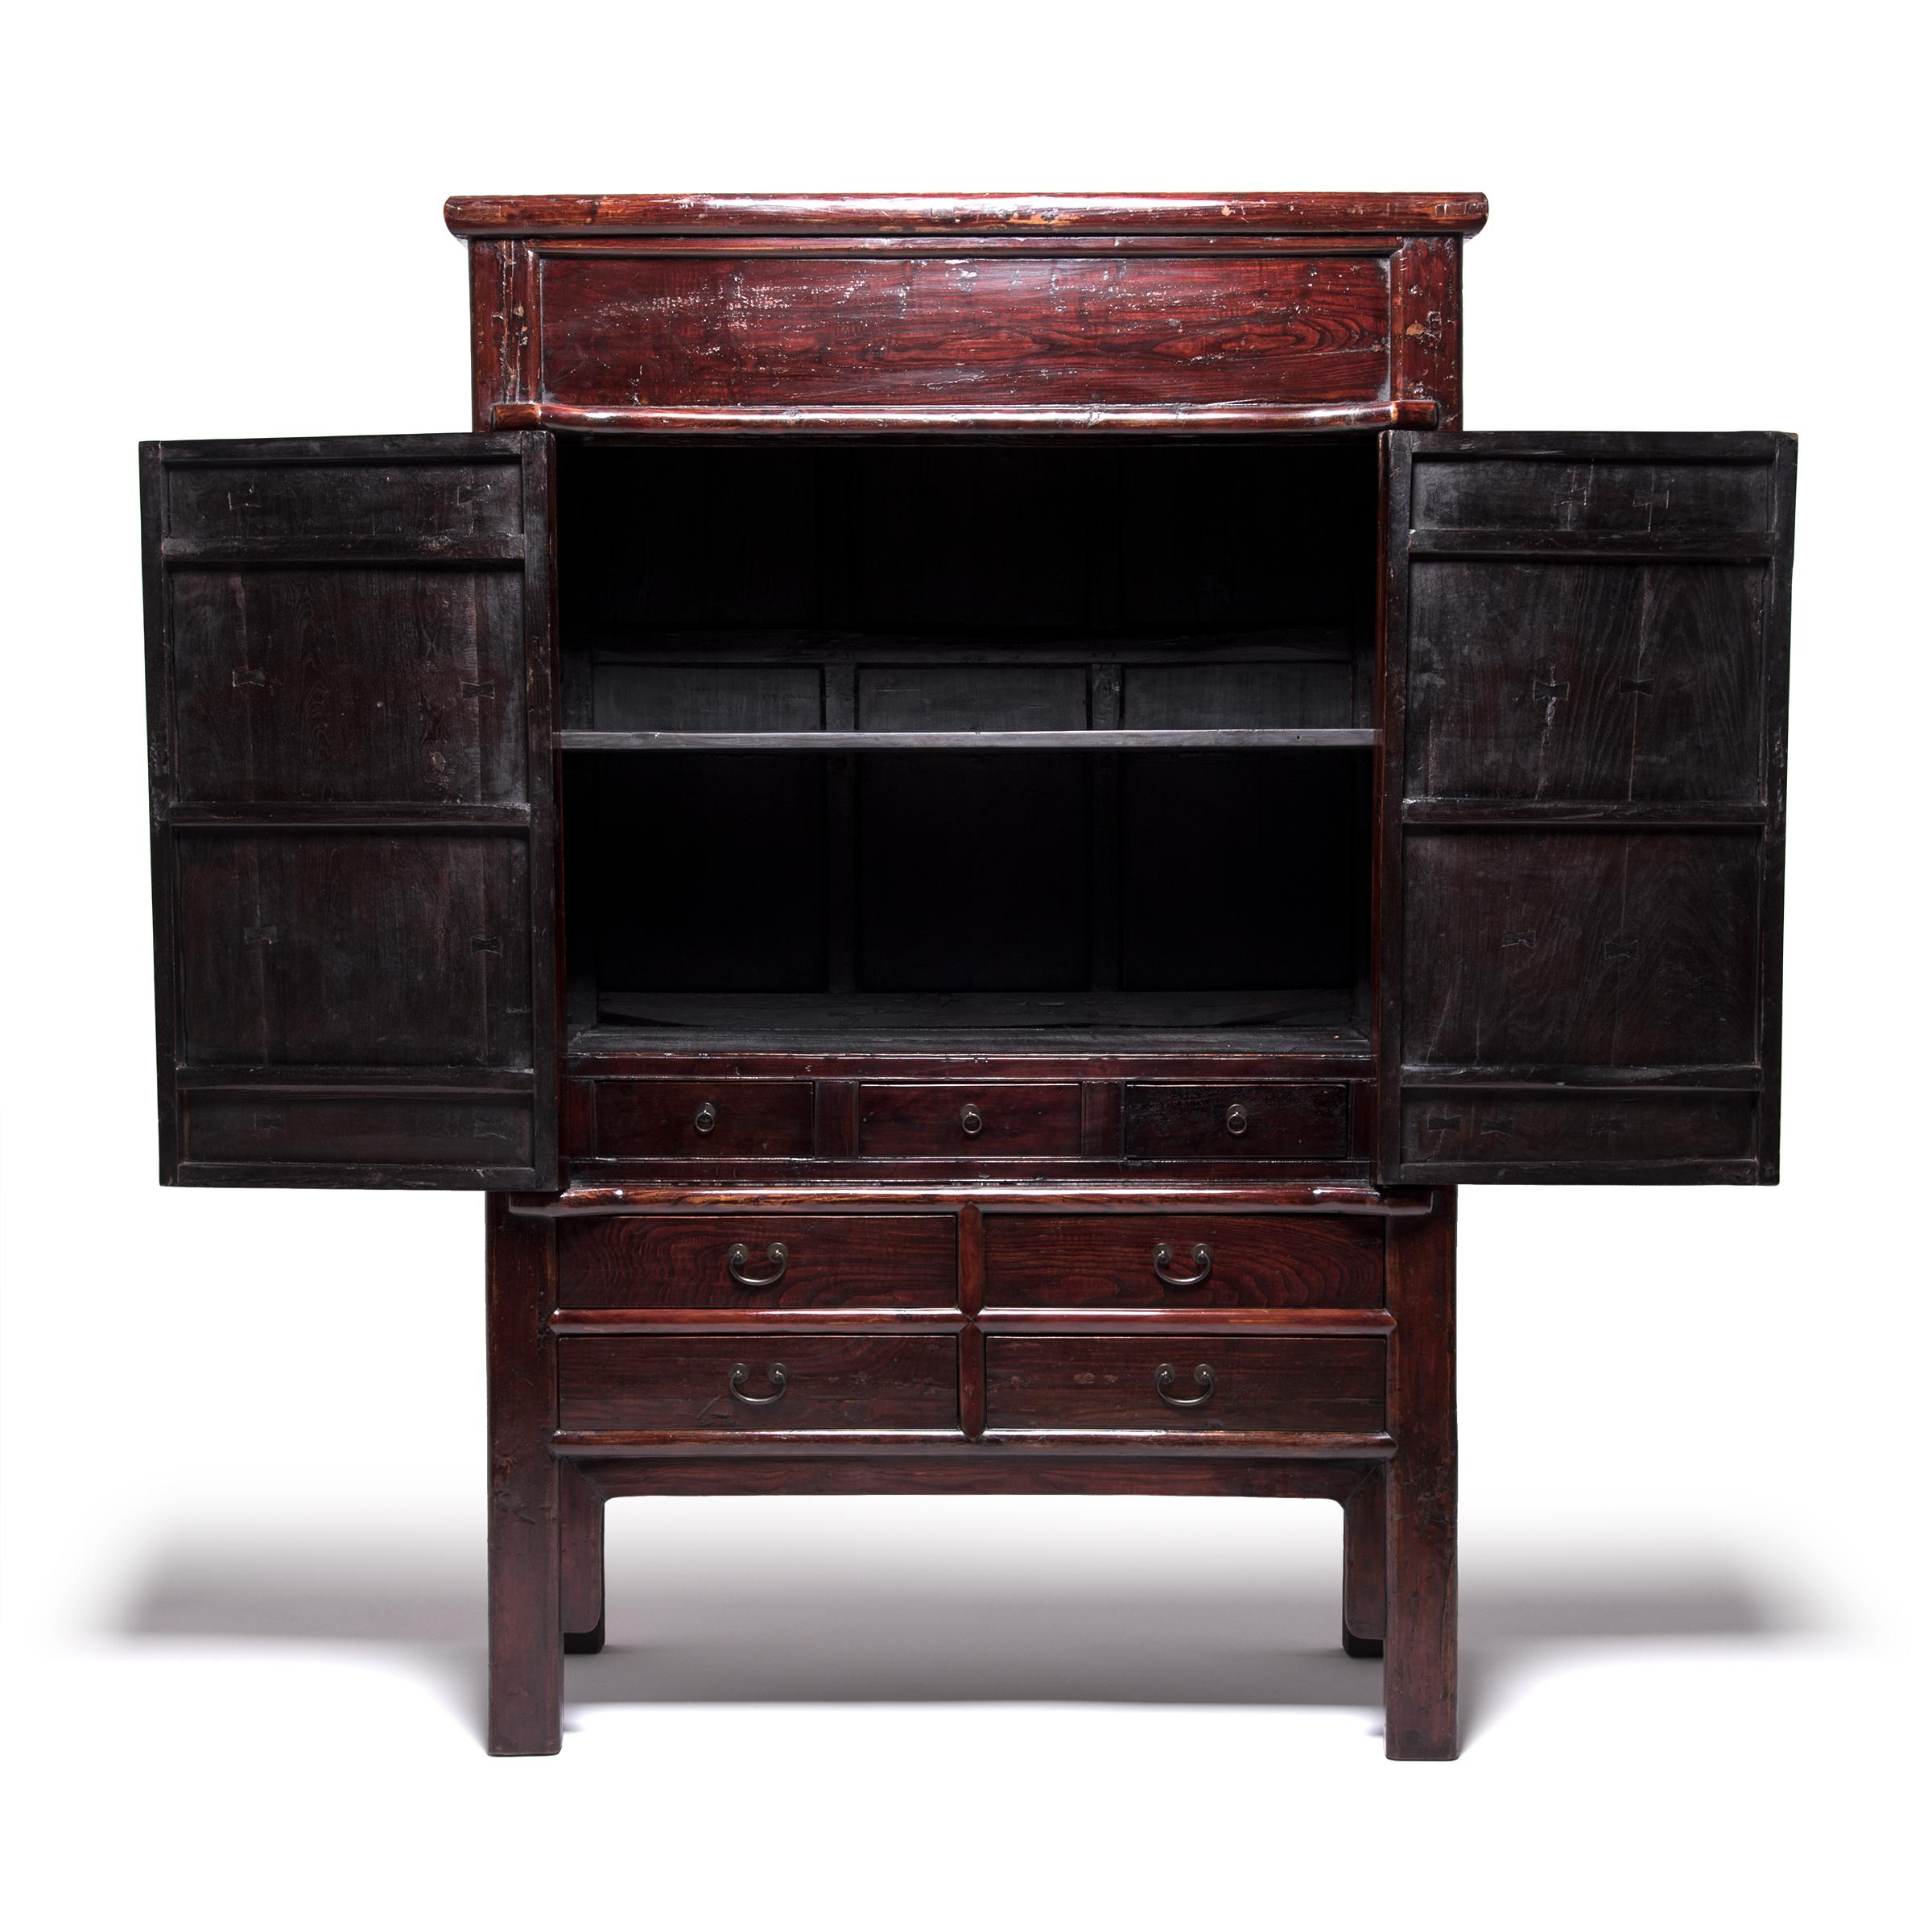 This austere 19th century Chinese cabinet from China's Shanxi province was constructed with grand proportions. The expressive grain of northern elmwood (yumu) patterns the doors with subtle texture and adds an understated elegance to a cabinet of